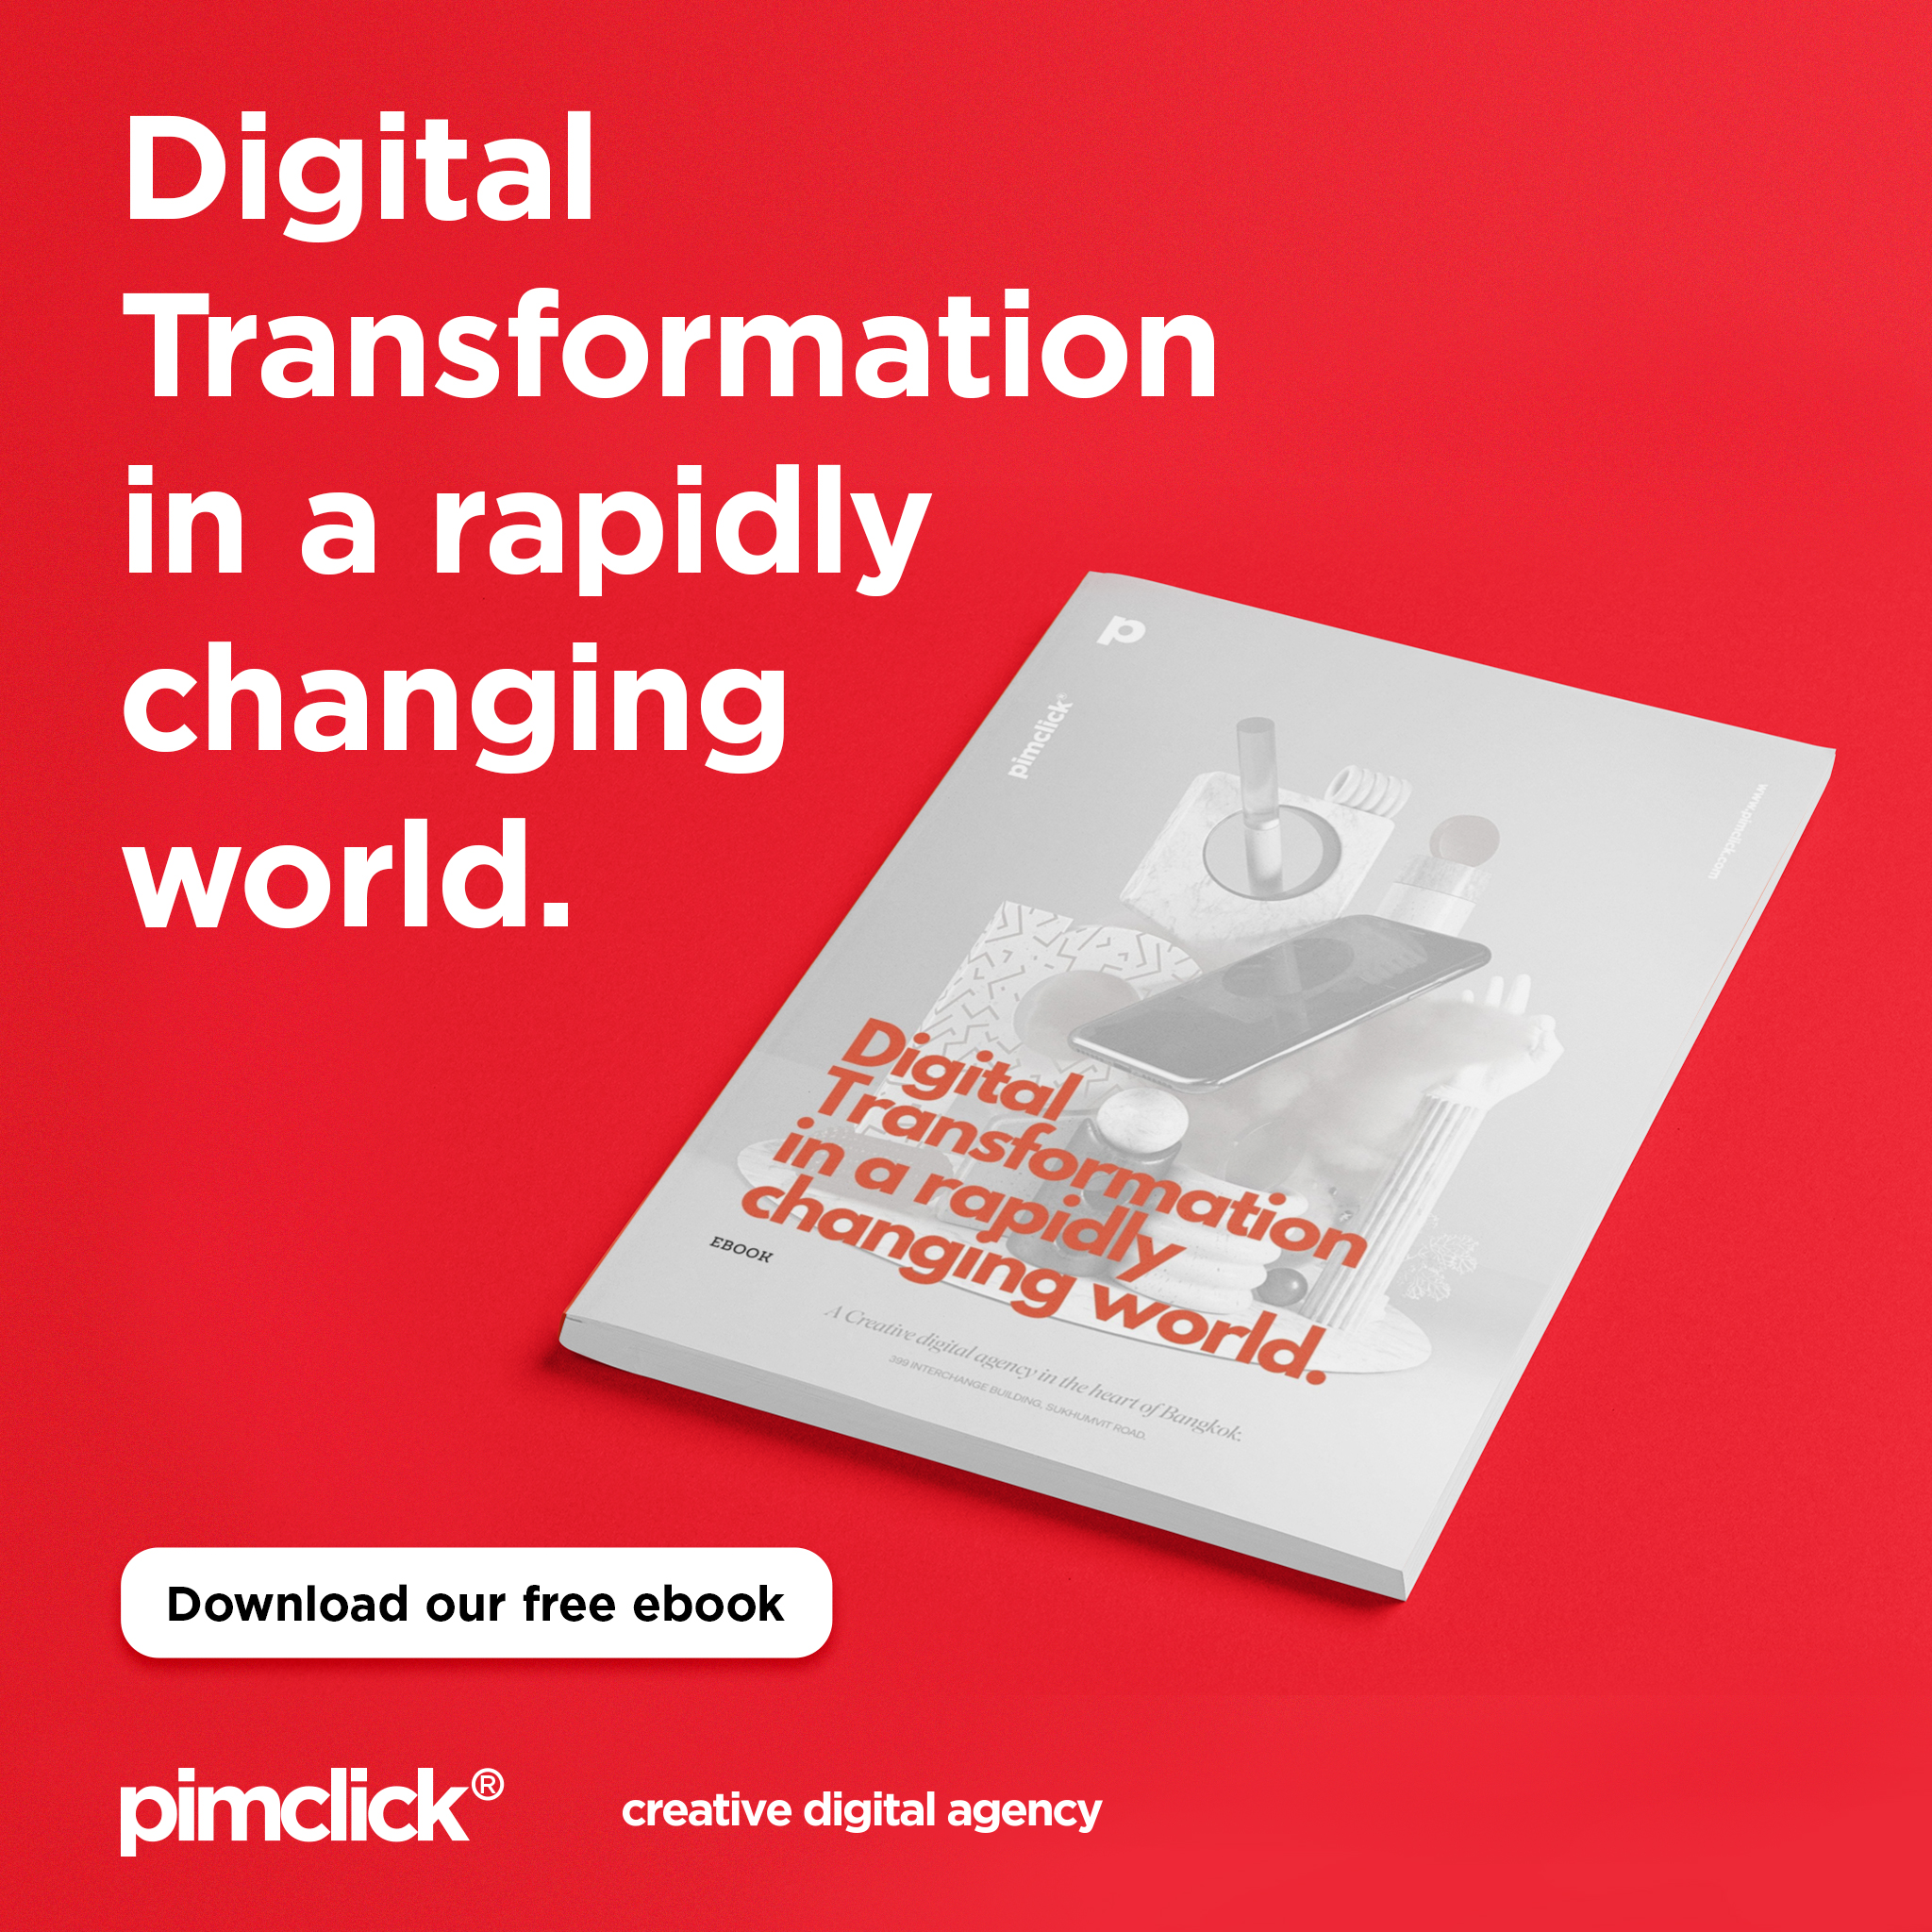 Available Now! Digital Transformation in a Rapidly Changing World, The Latest Ebook from Pimclick